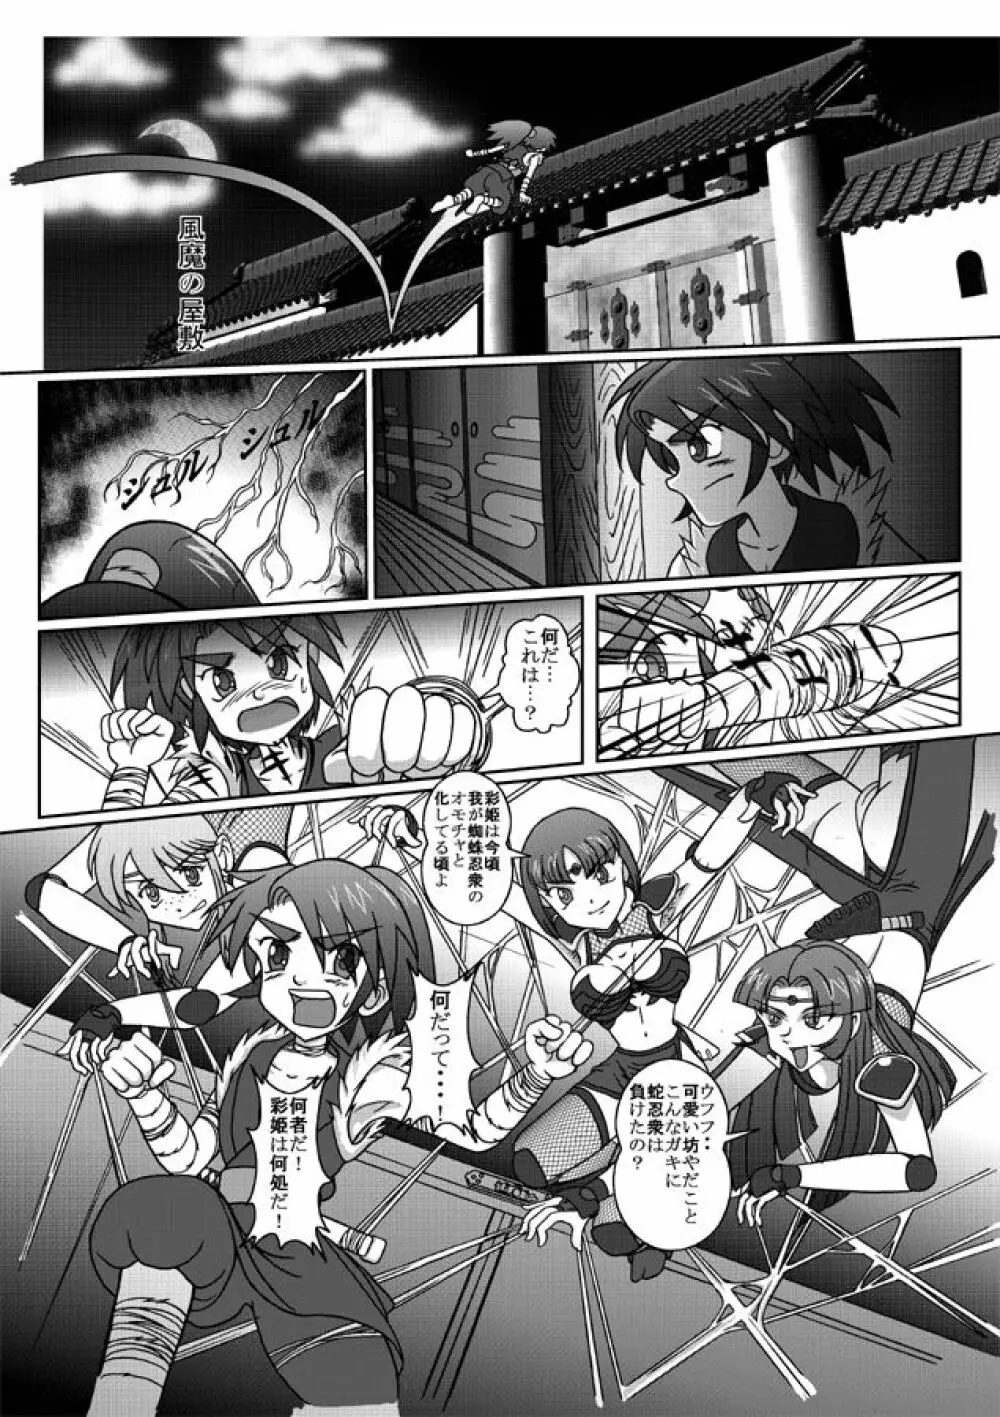 Same-themed manga about kid fighting female ninjas from japanese imageboard. Page.19